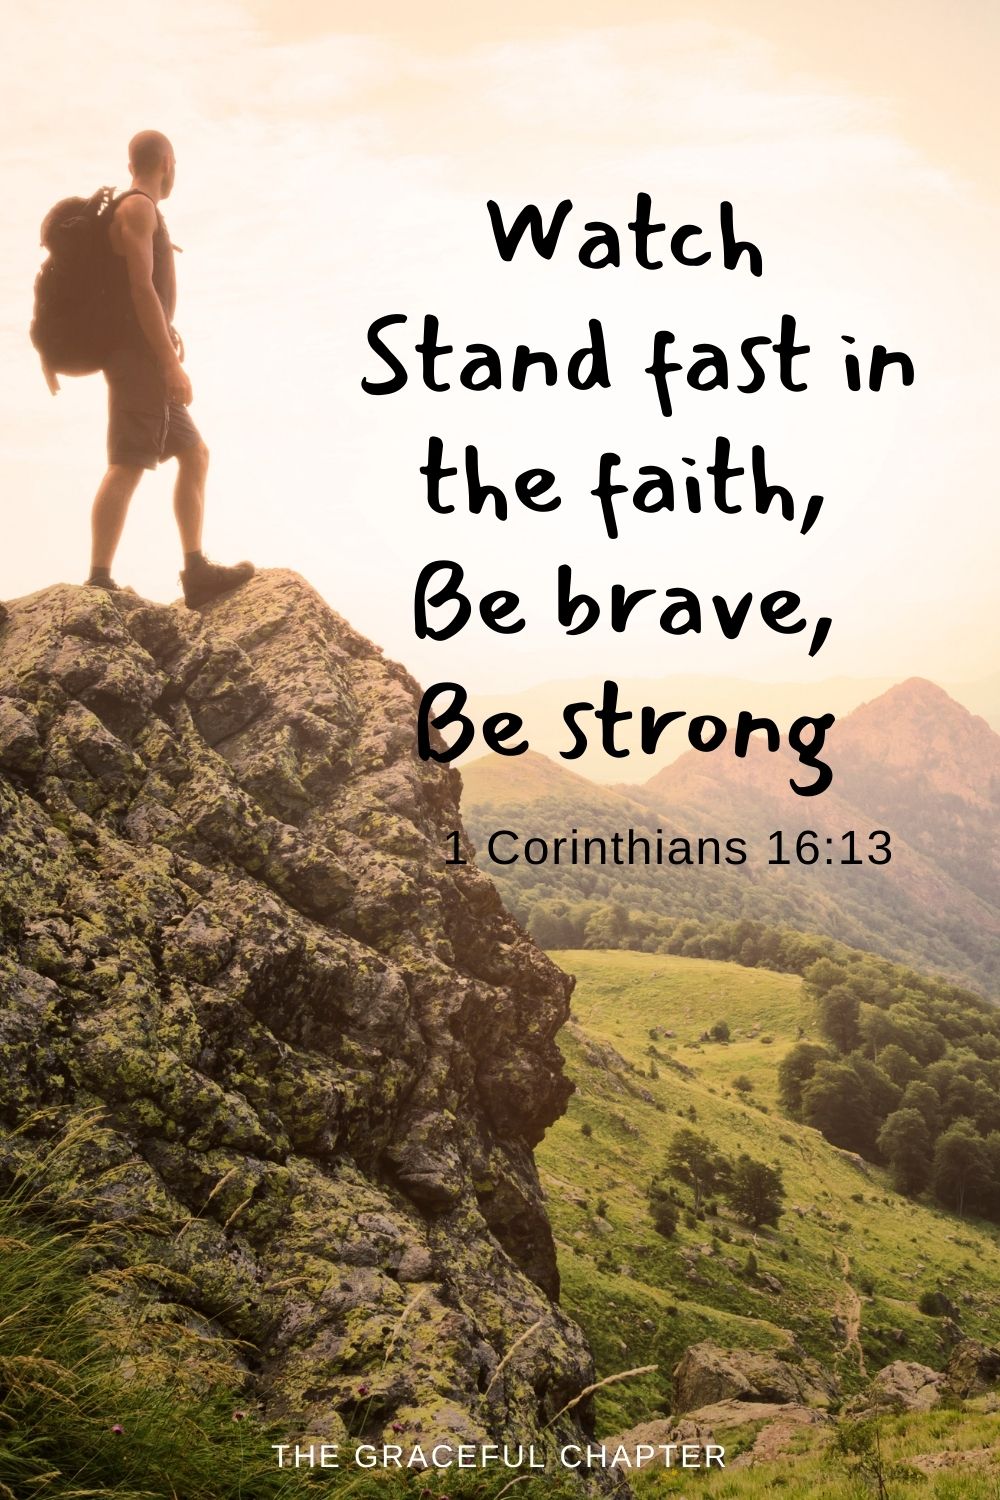 Watch, stand fast in the faith, be brave, be strong 1 Corinthians 16:13